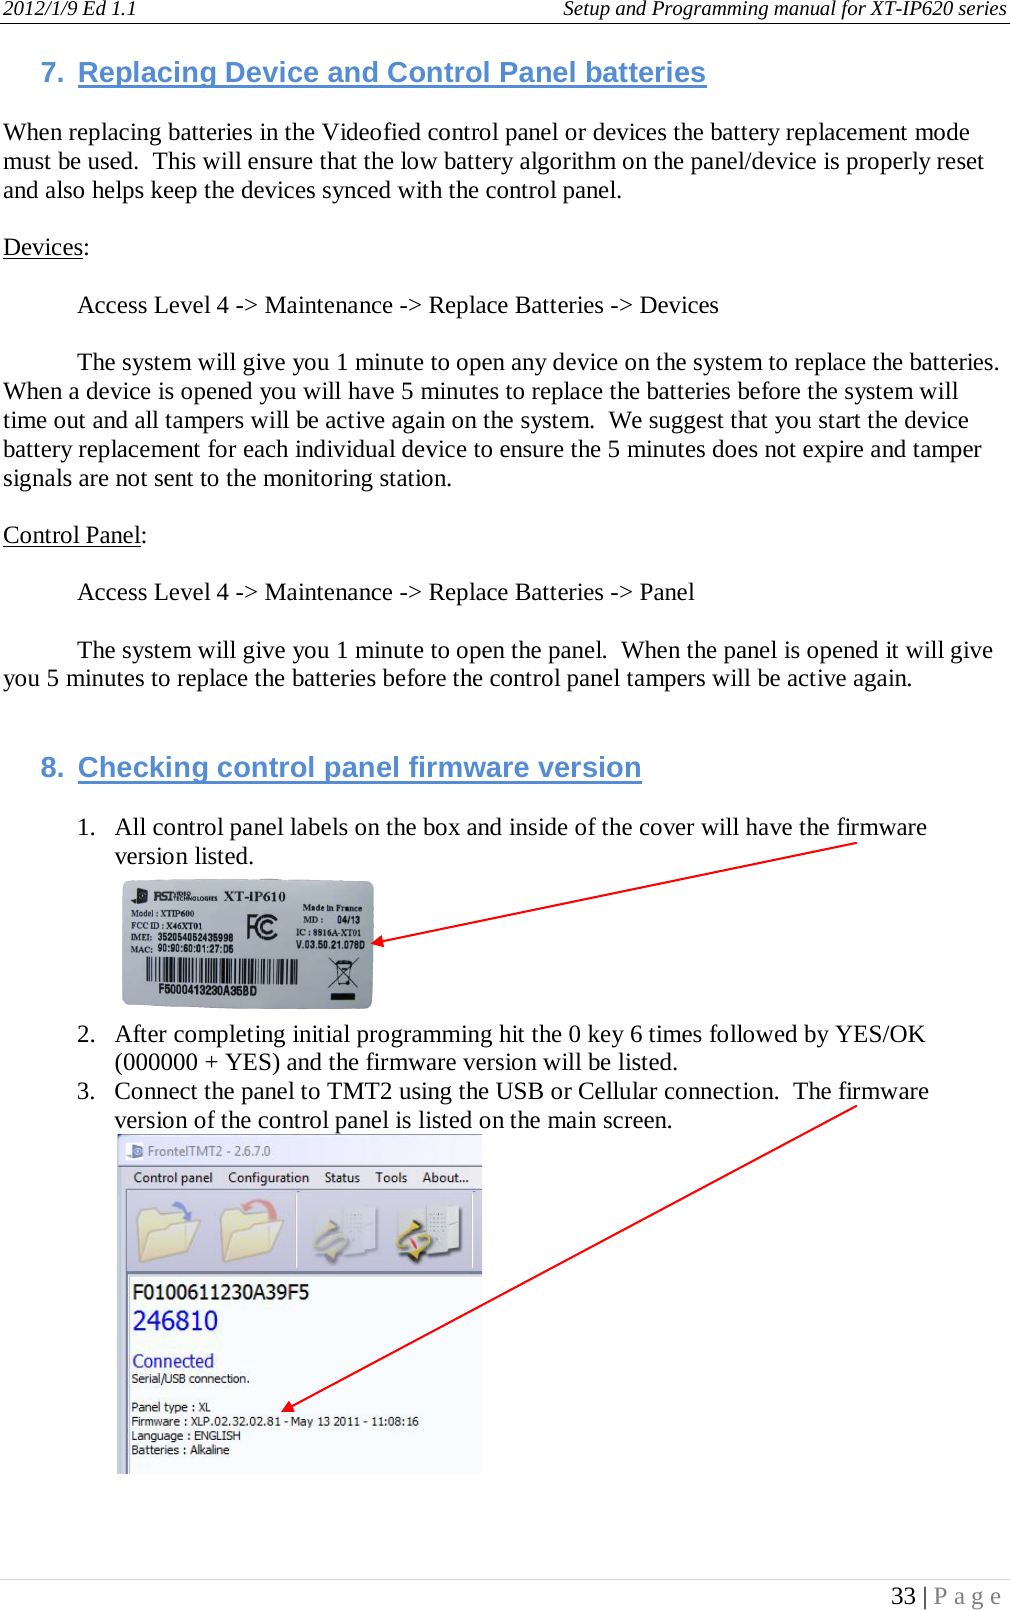 2012/1/9 Ed 1.1     Setup and Programming manual for XT-IP620 series   33 | Page  7. Replacing Device and Control Panel batteries  When replacing batteries in the Videofied control panel or devices the battery replacement mode must be used.  This will ensure that the low battery algorithm on the panel/device is properly reset and also helps keep the devices synced with the control panel.  Devices:  Access Level 4 -&gt; Maintenance -&gt; Replace Batteries -&gt; Devices  The system will give you 1 minute to open any device on the system to replace the batteries.  When a device is opened you will have 5 minutes to replace the batteries before the system will time out and all tampers will be active again on the system.  We suggest that you start the device battery replacement for each individual device to ensure the 5 minutes does not expire and tamper signals are not sent to the monitoring station.  Control Panel:  Access Level 4 -&gt; Maintenance -&gt; Replace Batteries -&gt; Panel  The system will give you 1 minute to open the panel.  When the panel is opened it will give you 5 minutes to replace the batteries before the control panel tampers will be active again.     8. Checking control panel firmware version  1. All control panel labels on the box and inside of the cover will have the firmware version listed.  2. After completing initial programming hit the 0 key 6 times followed by YES/OK (000000 + YES) and the firmware version will be listed. 3. Connect the panel to TMT2 using the USB or Cellular connection.  The firmware version of the control panel is listed on the main screen.     